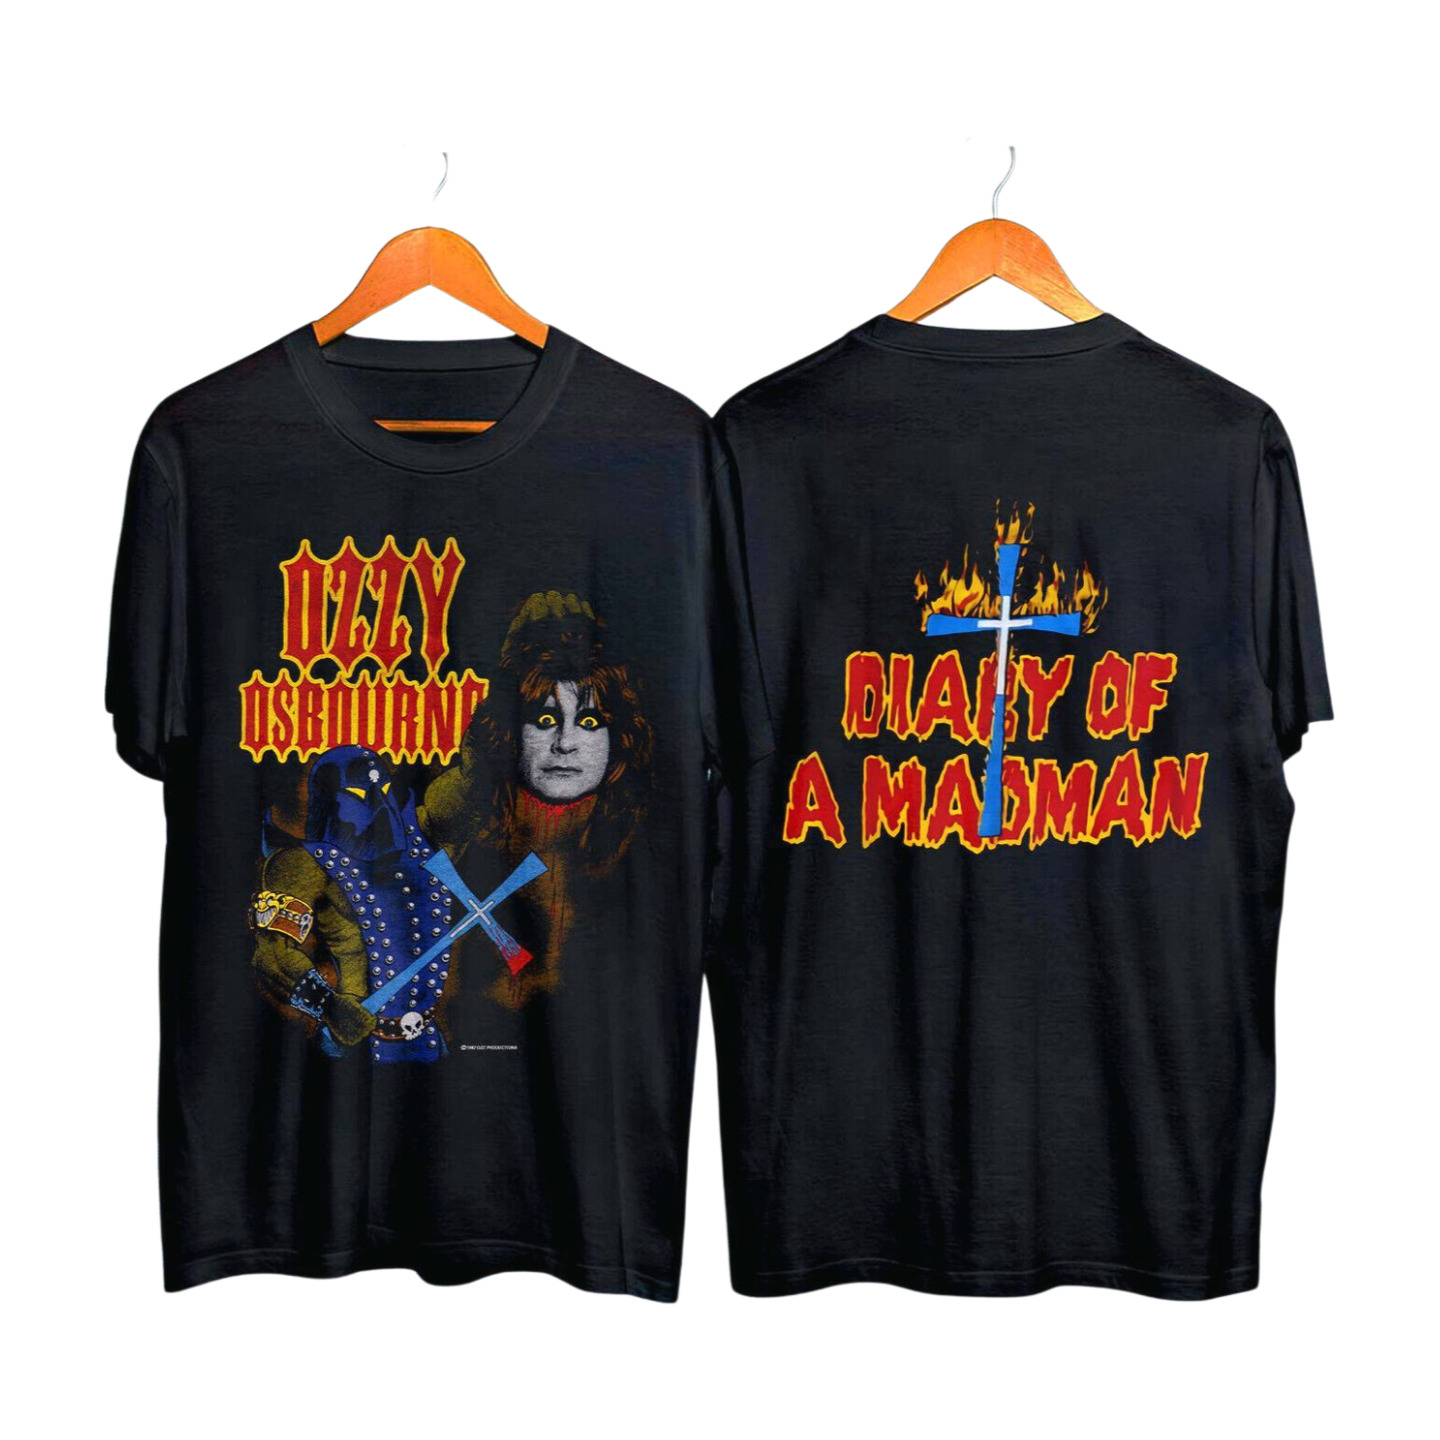 Vintage Style 1982 Ozzy Osbourne Diary Of A Madman T-Shirt